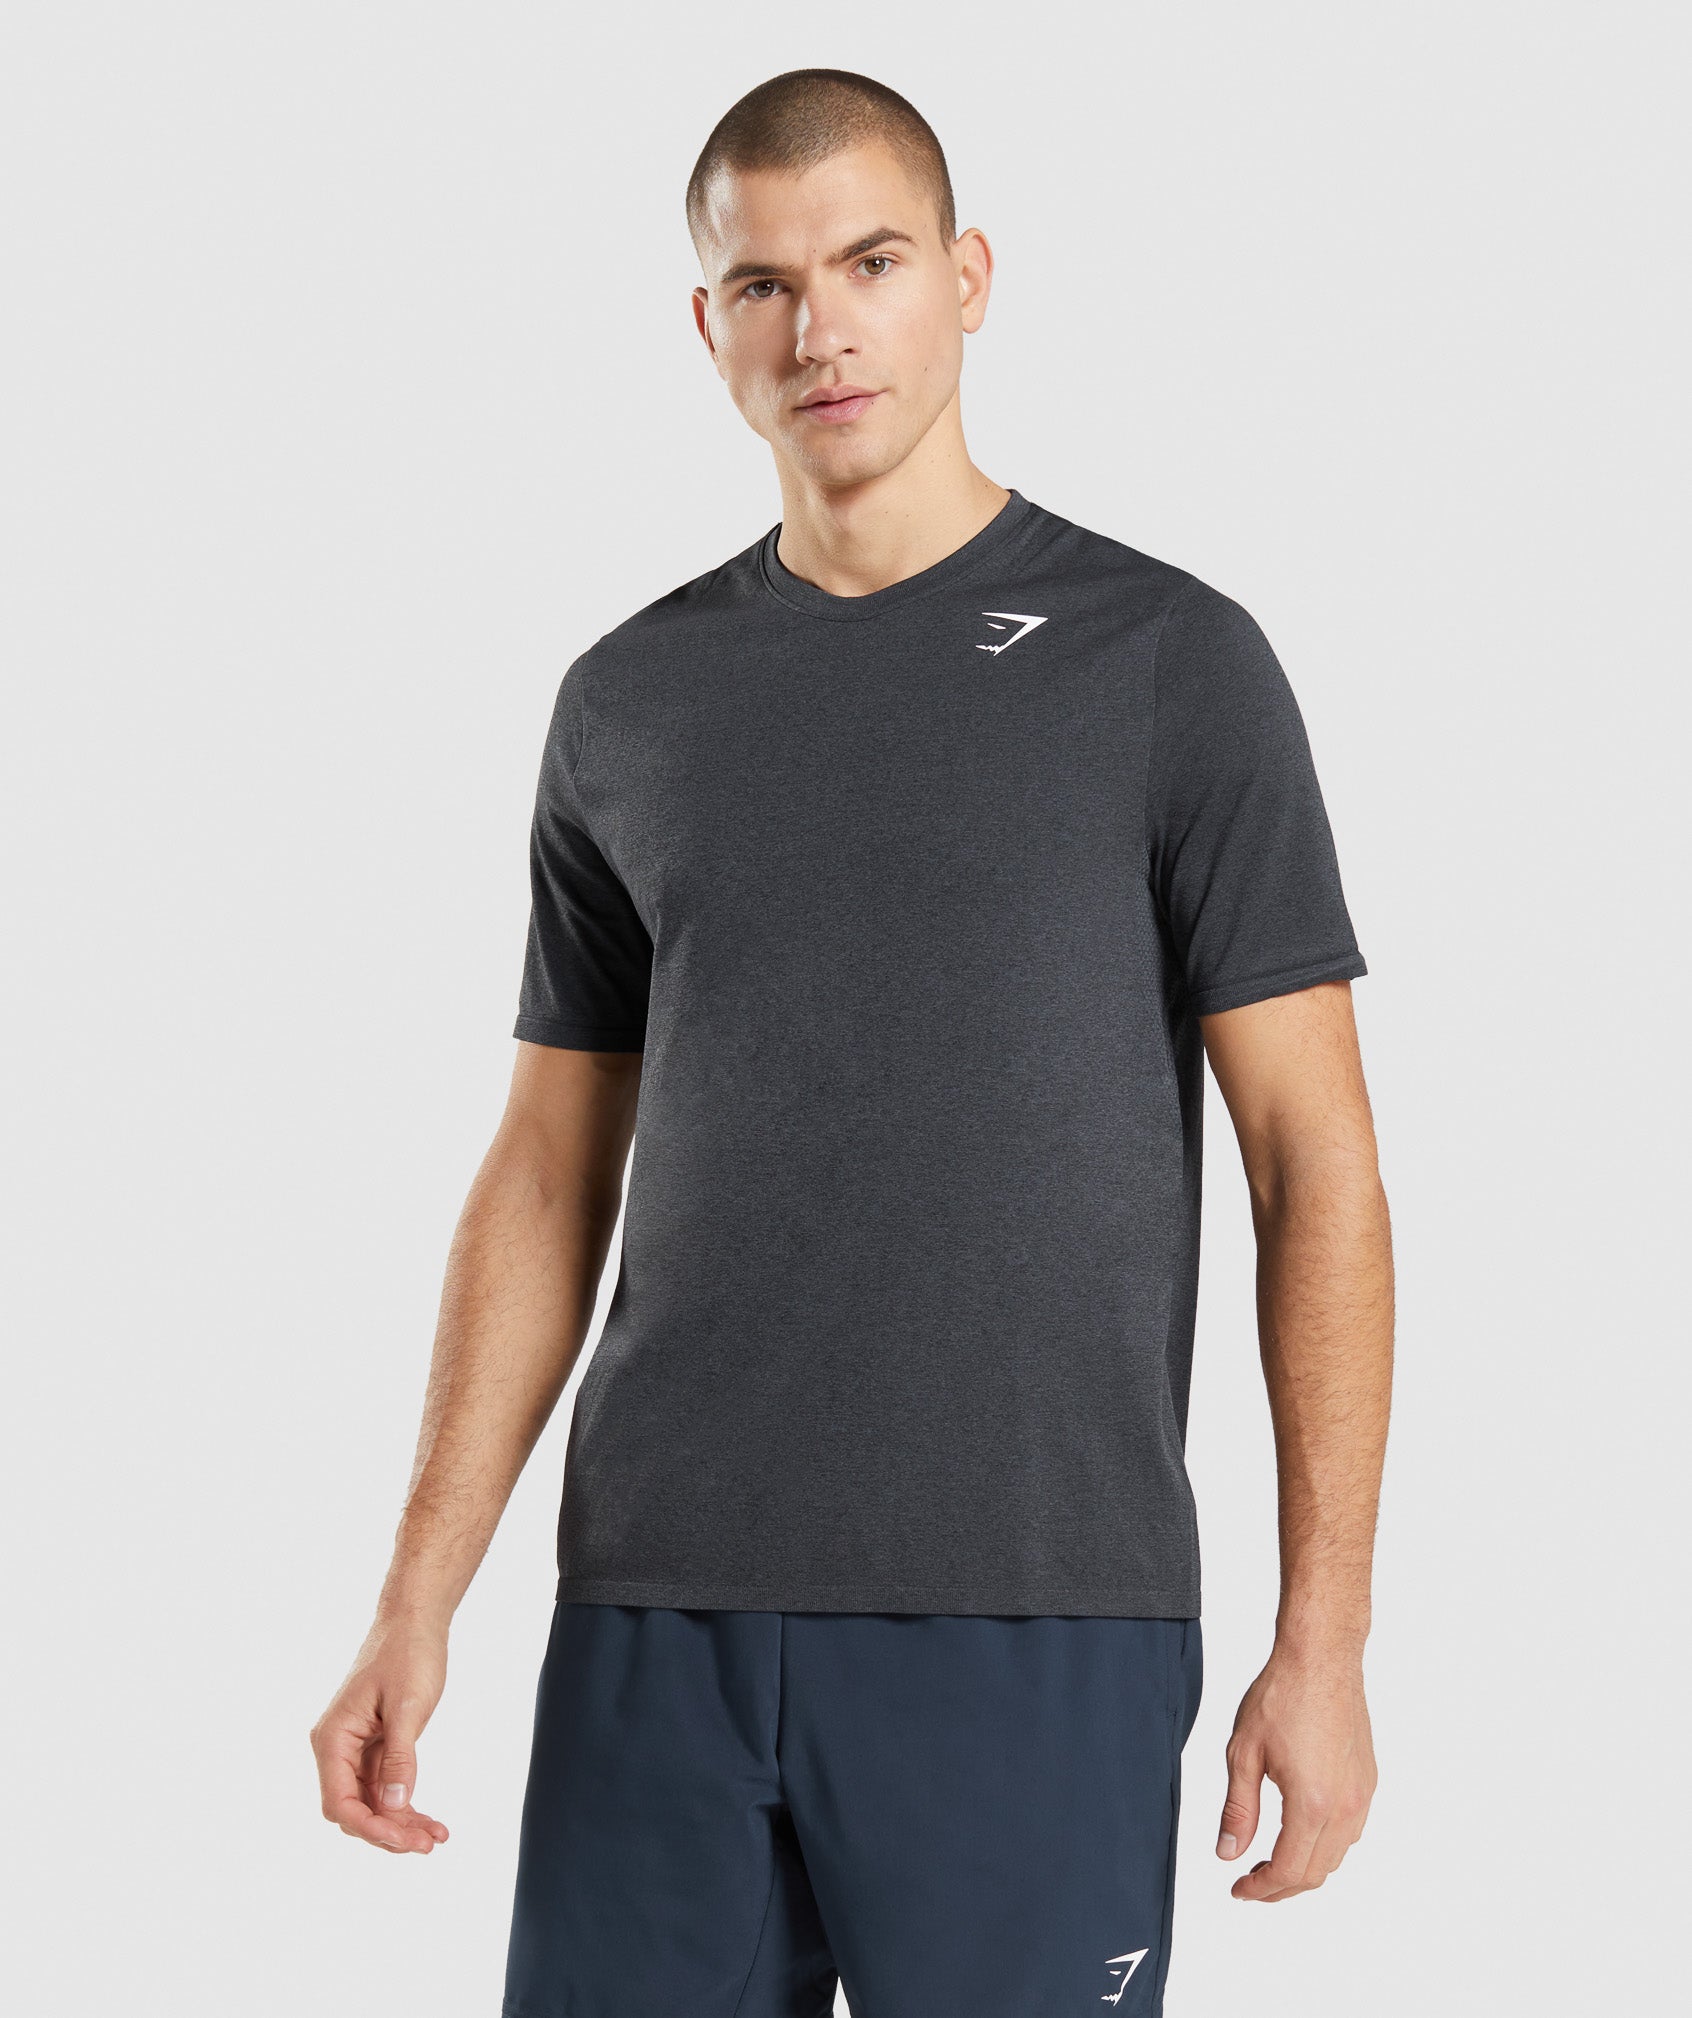 Arrival Seamless T-Shirt in Black Marl - view 1